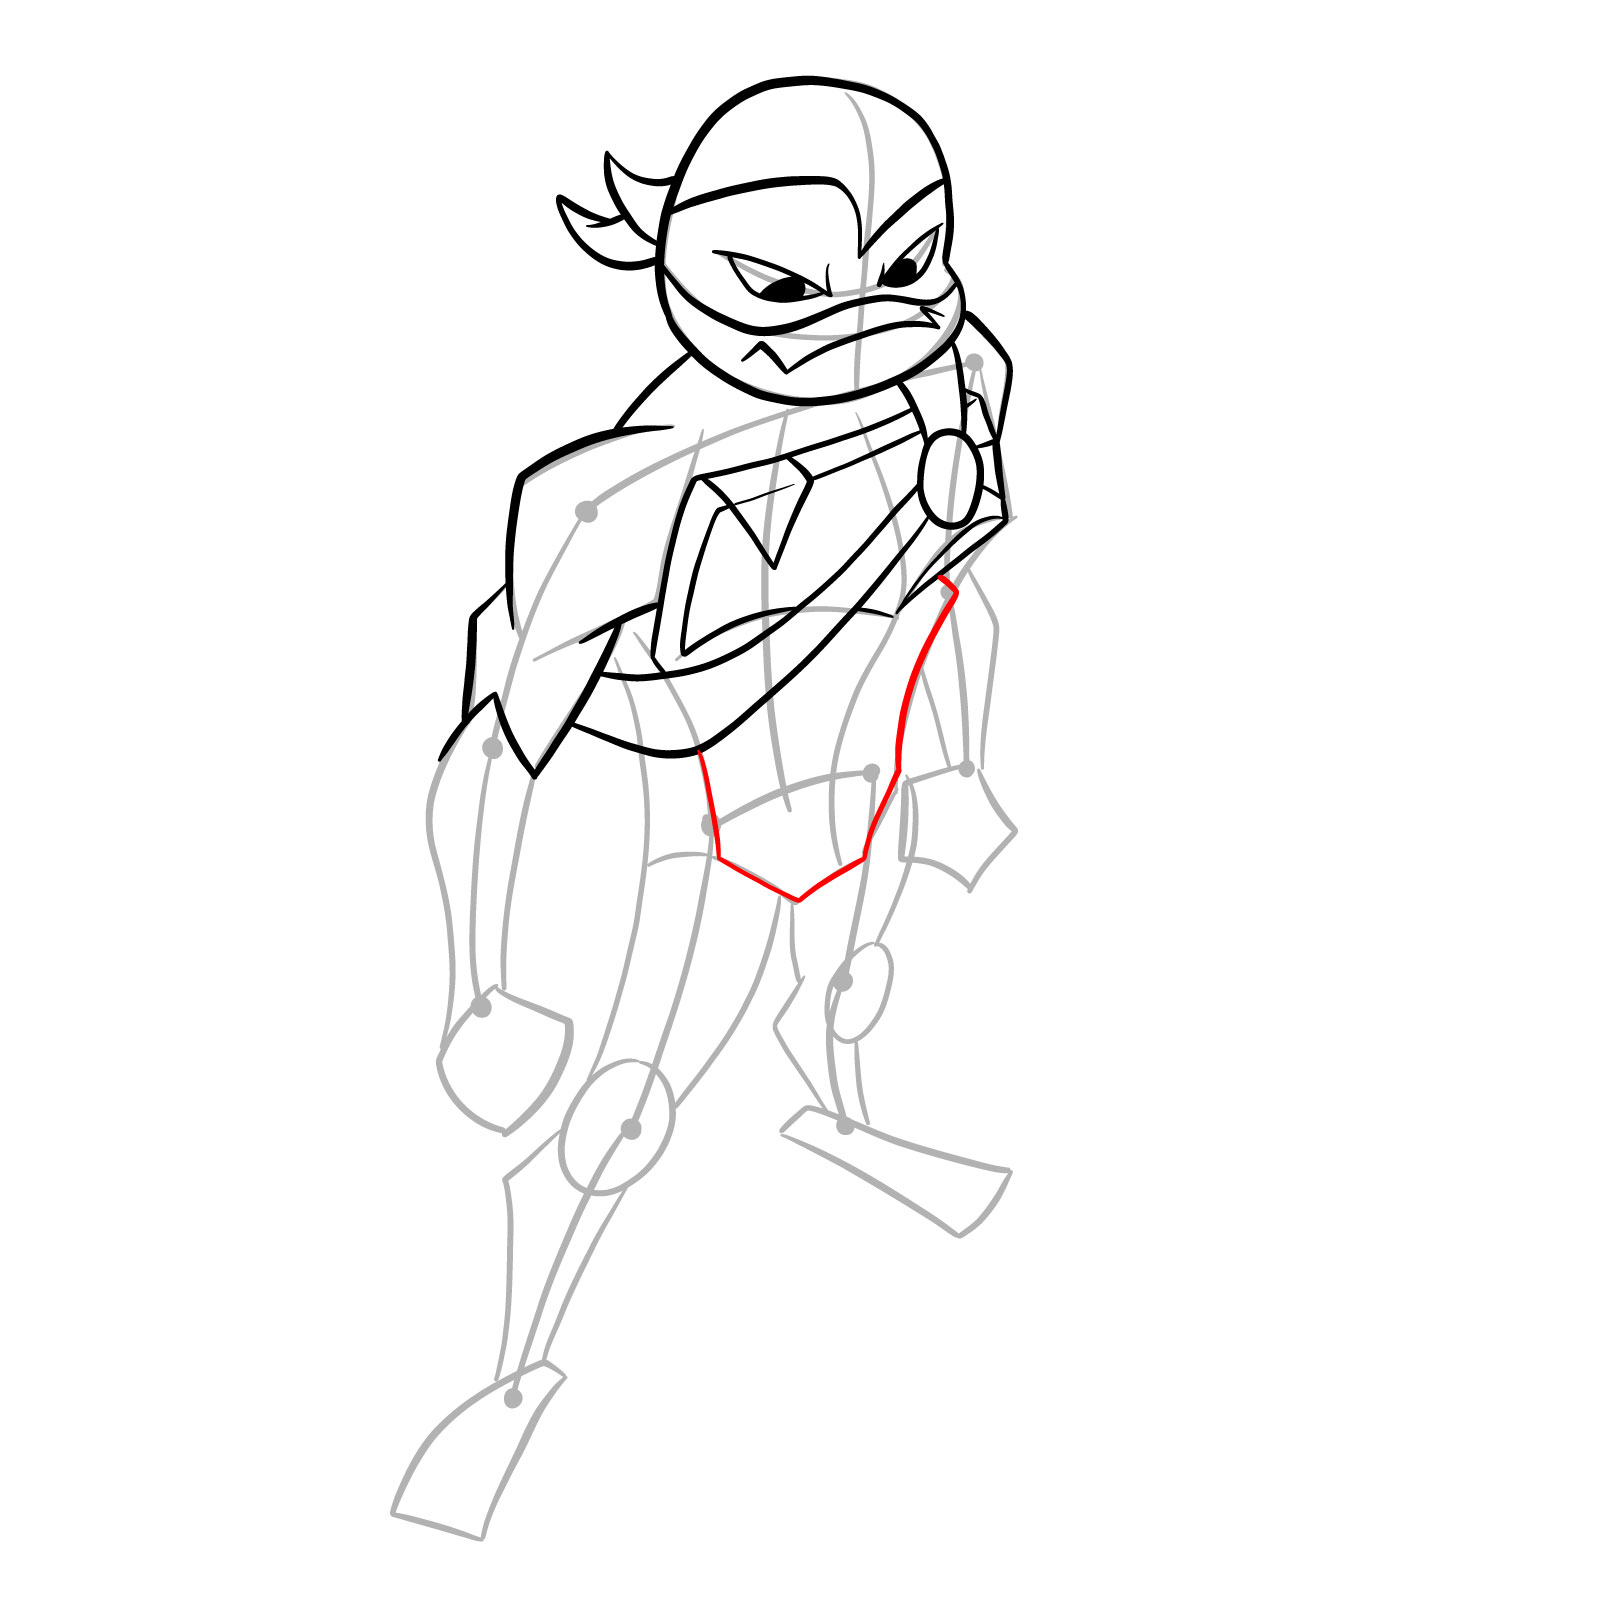 How to draw Mikey in Hamato Ninpō state - step 16